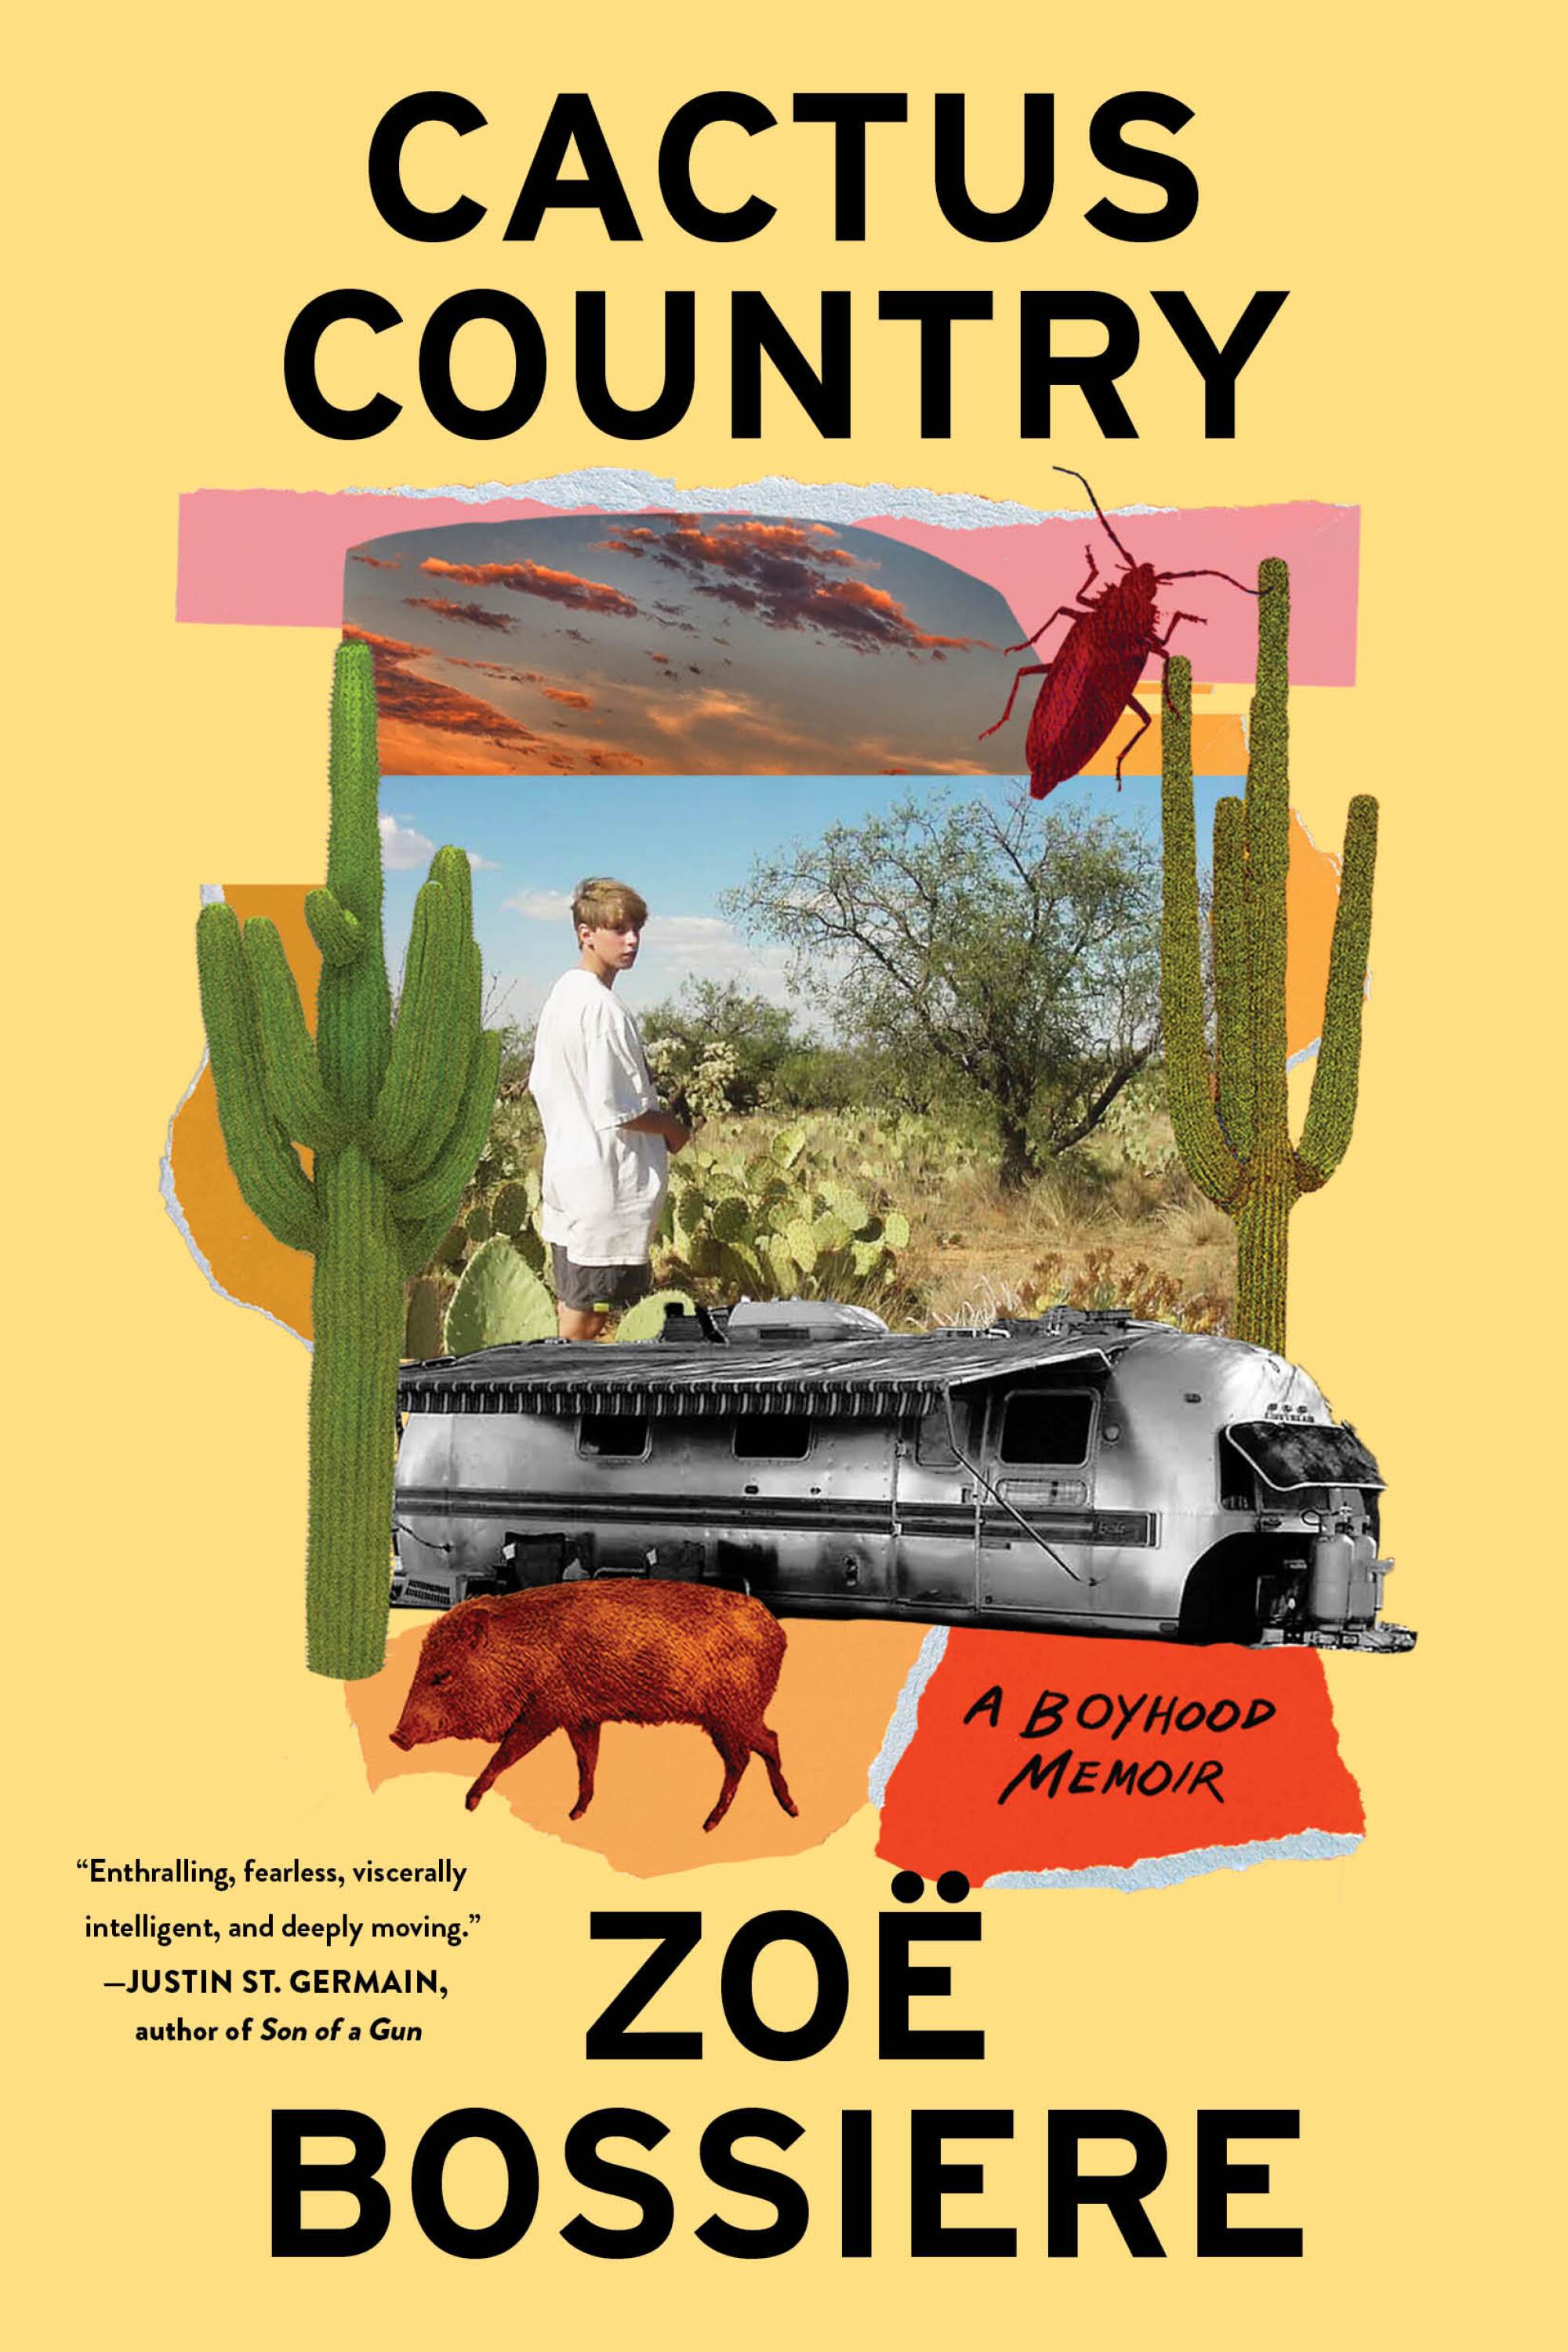 "Cactus Country" by Zo? Bossiere